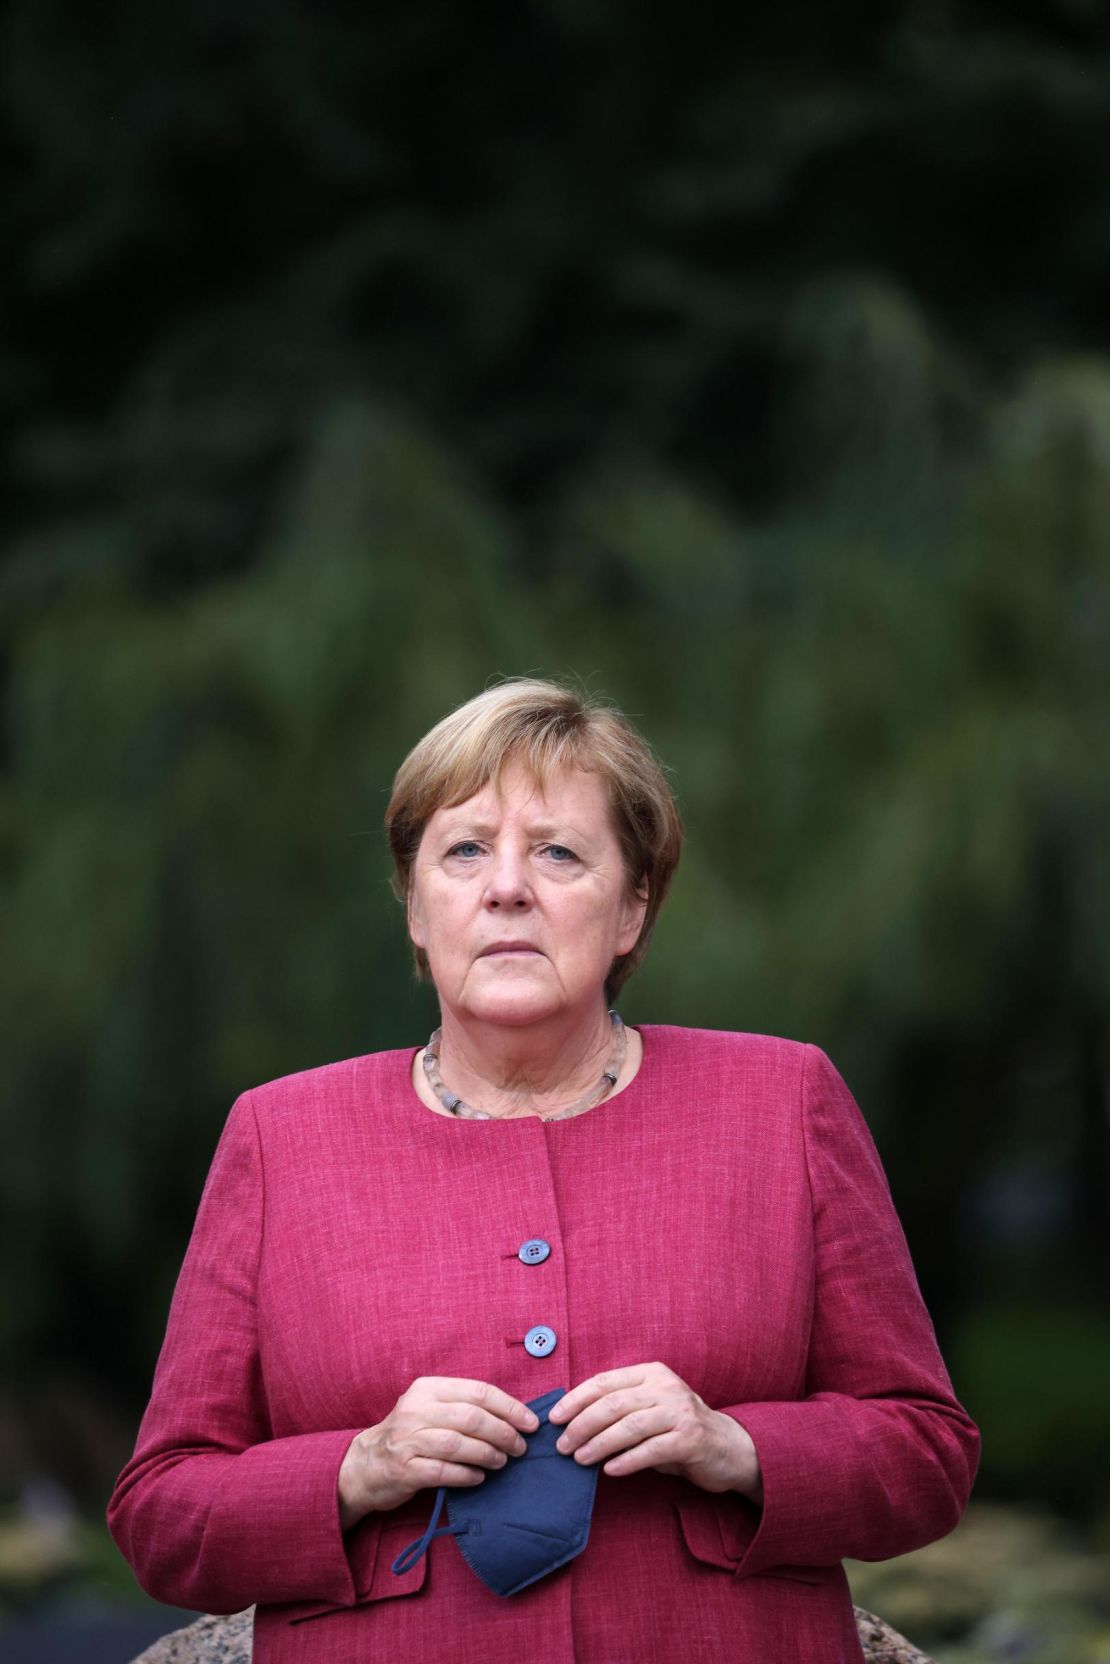 Angela Merkel will step down as Germany's chancellor once a new coalition deal is agreed and her replacement is confirmed.